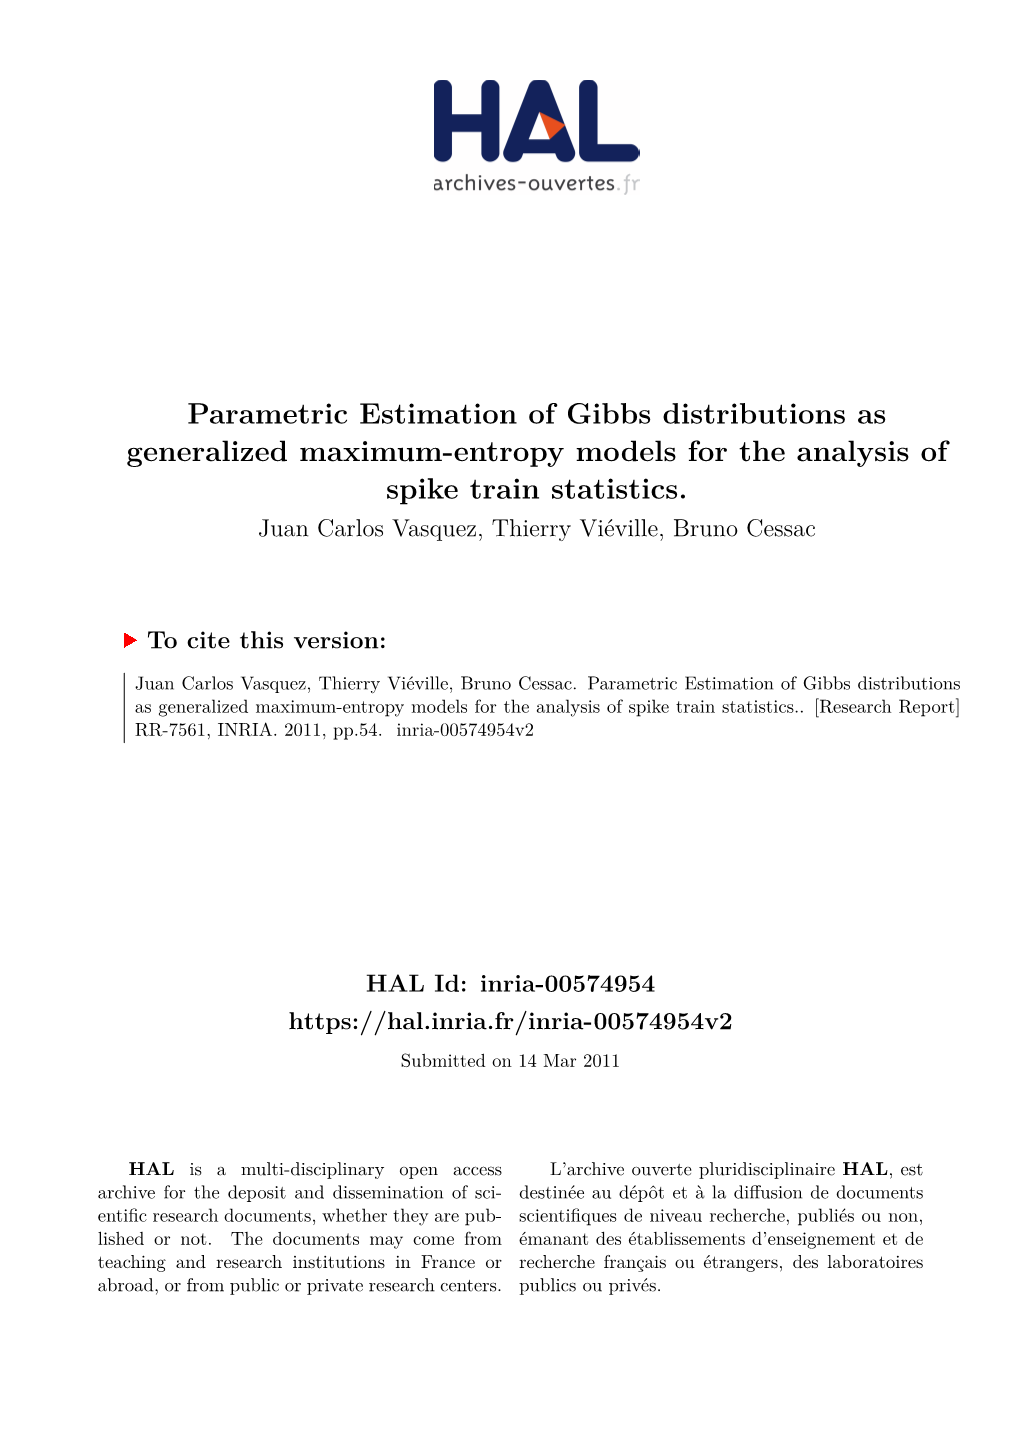 Parametric Estimation of Gibbs Distributions As Generalized Maximum-Entropy Models for the Analysis of Spike Train Statistics